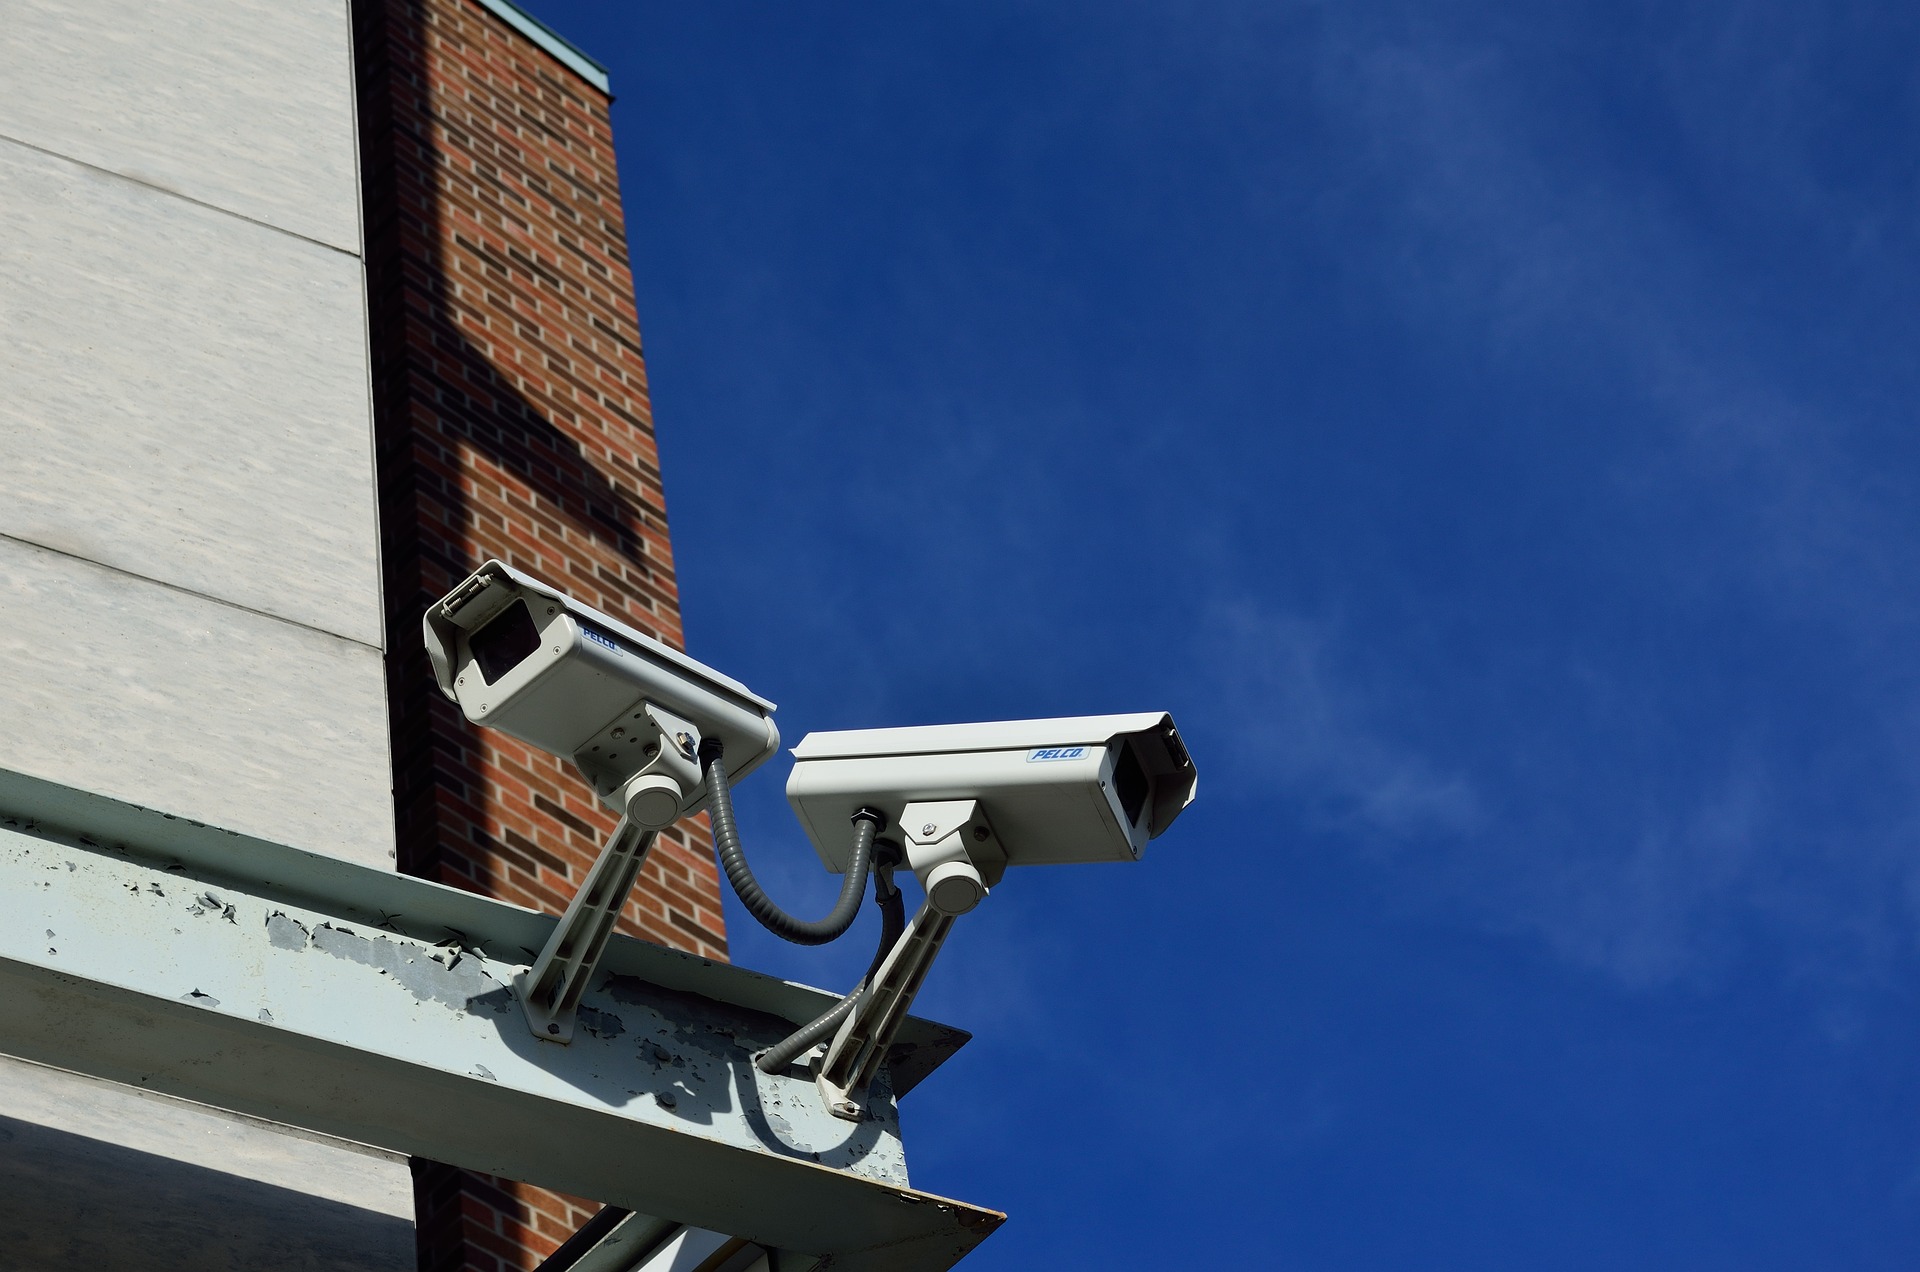 Israel, spyware that modifies surveillance camera images has been sold to Western governments